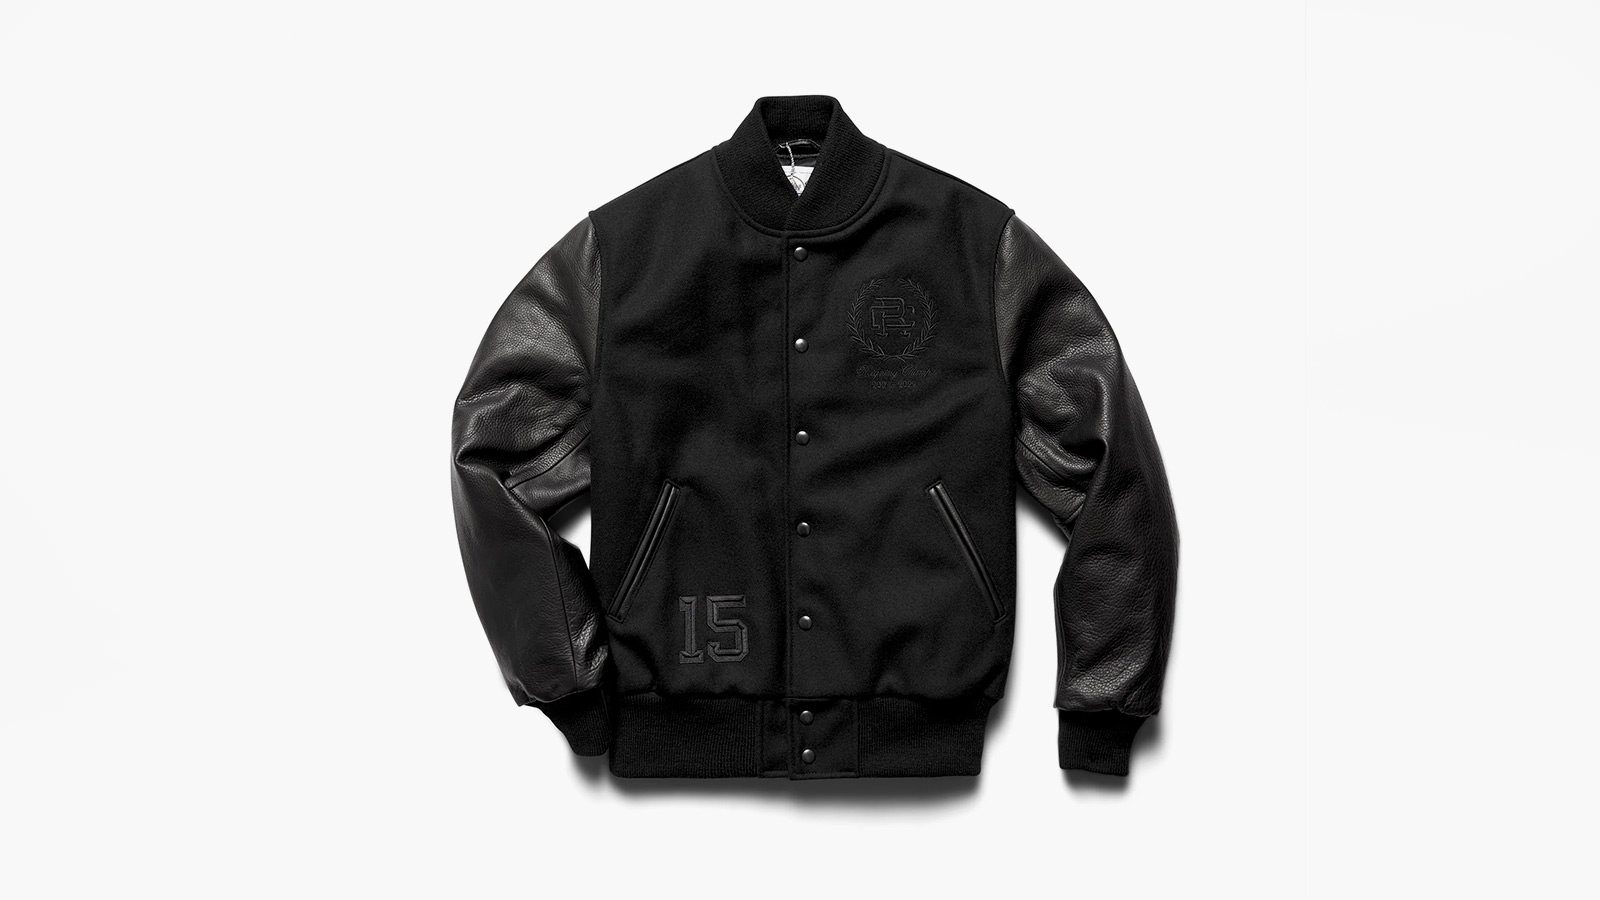 Reigning Champ 15th Anniversary Jacket